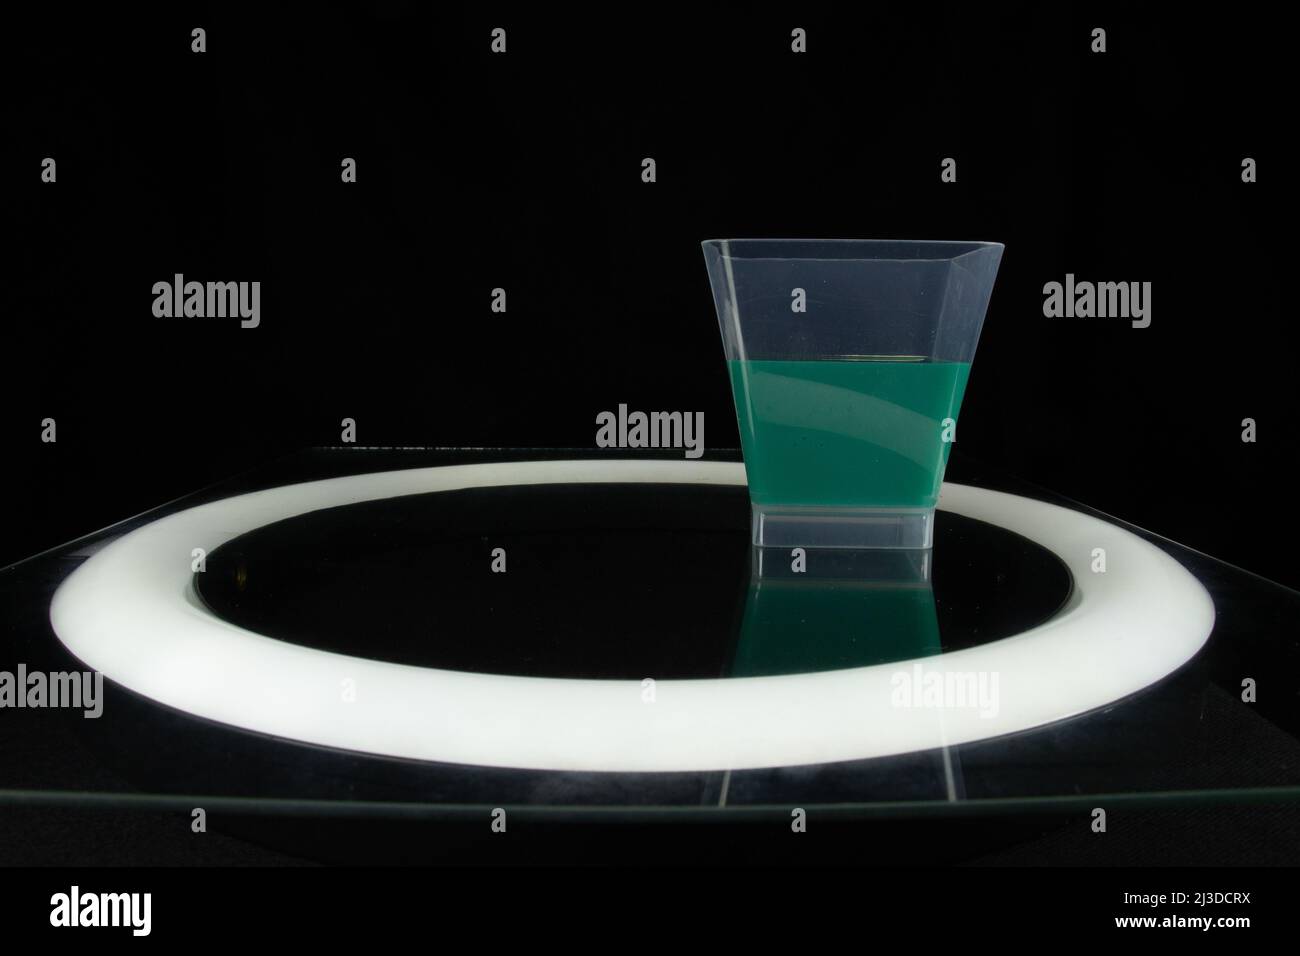 single plastic cup half full of green liquid isolated on a black background in a circle of light Stock Photo